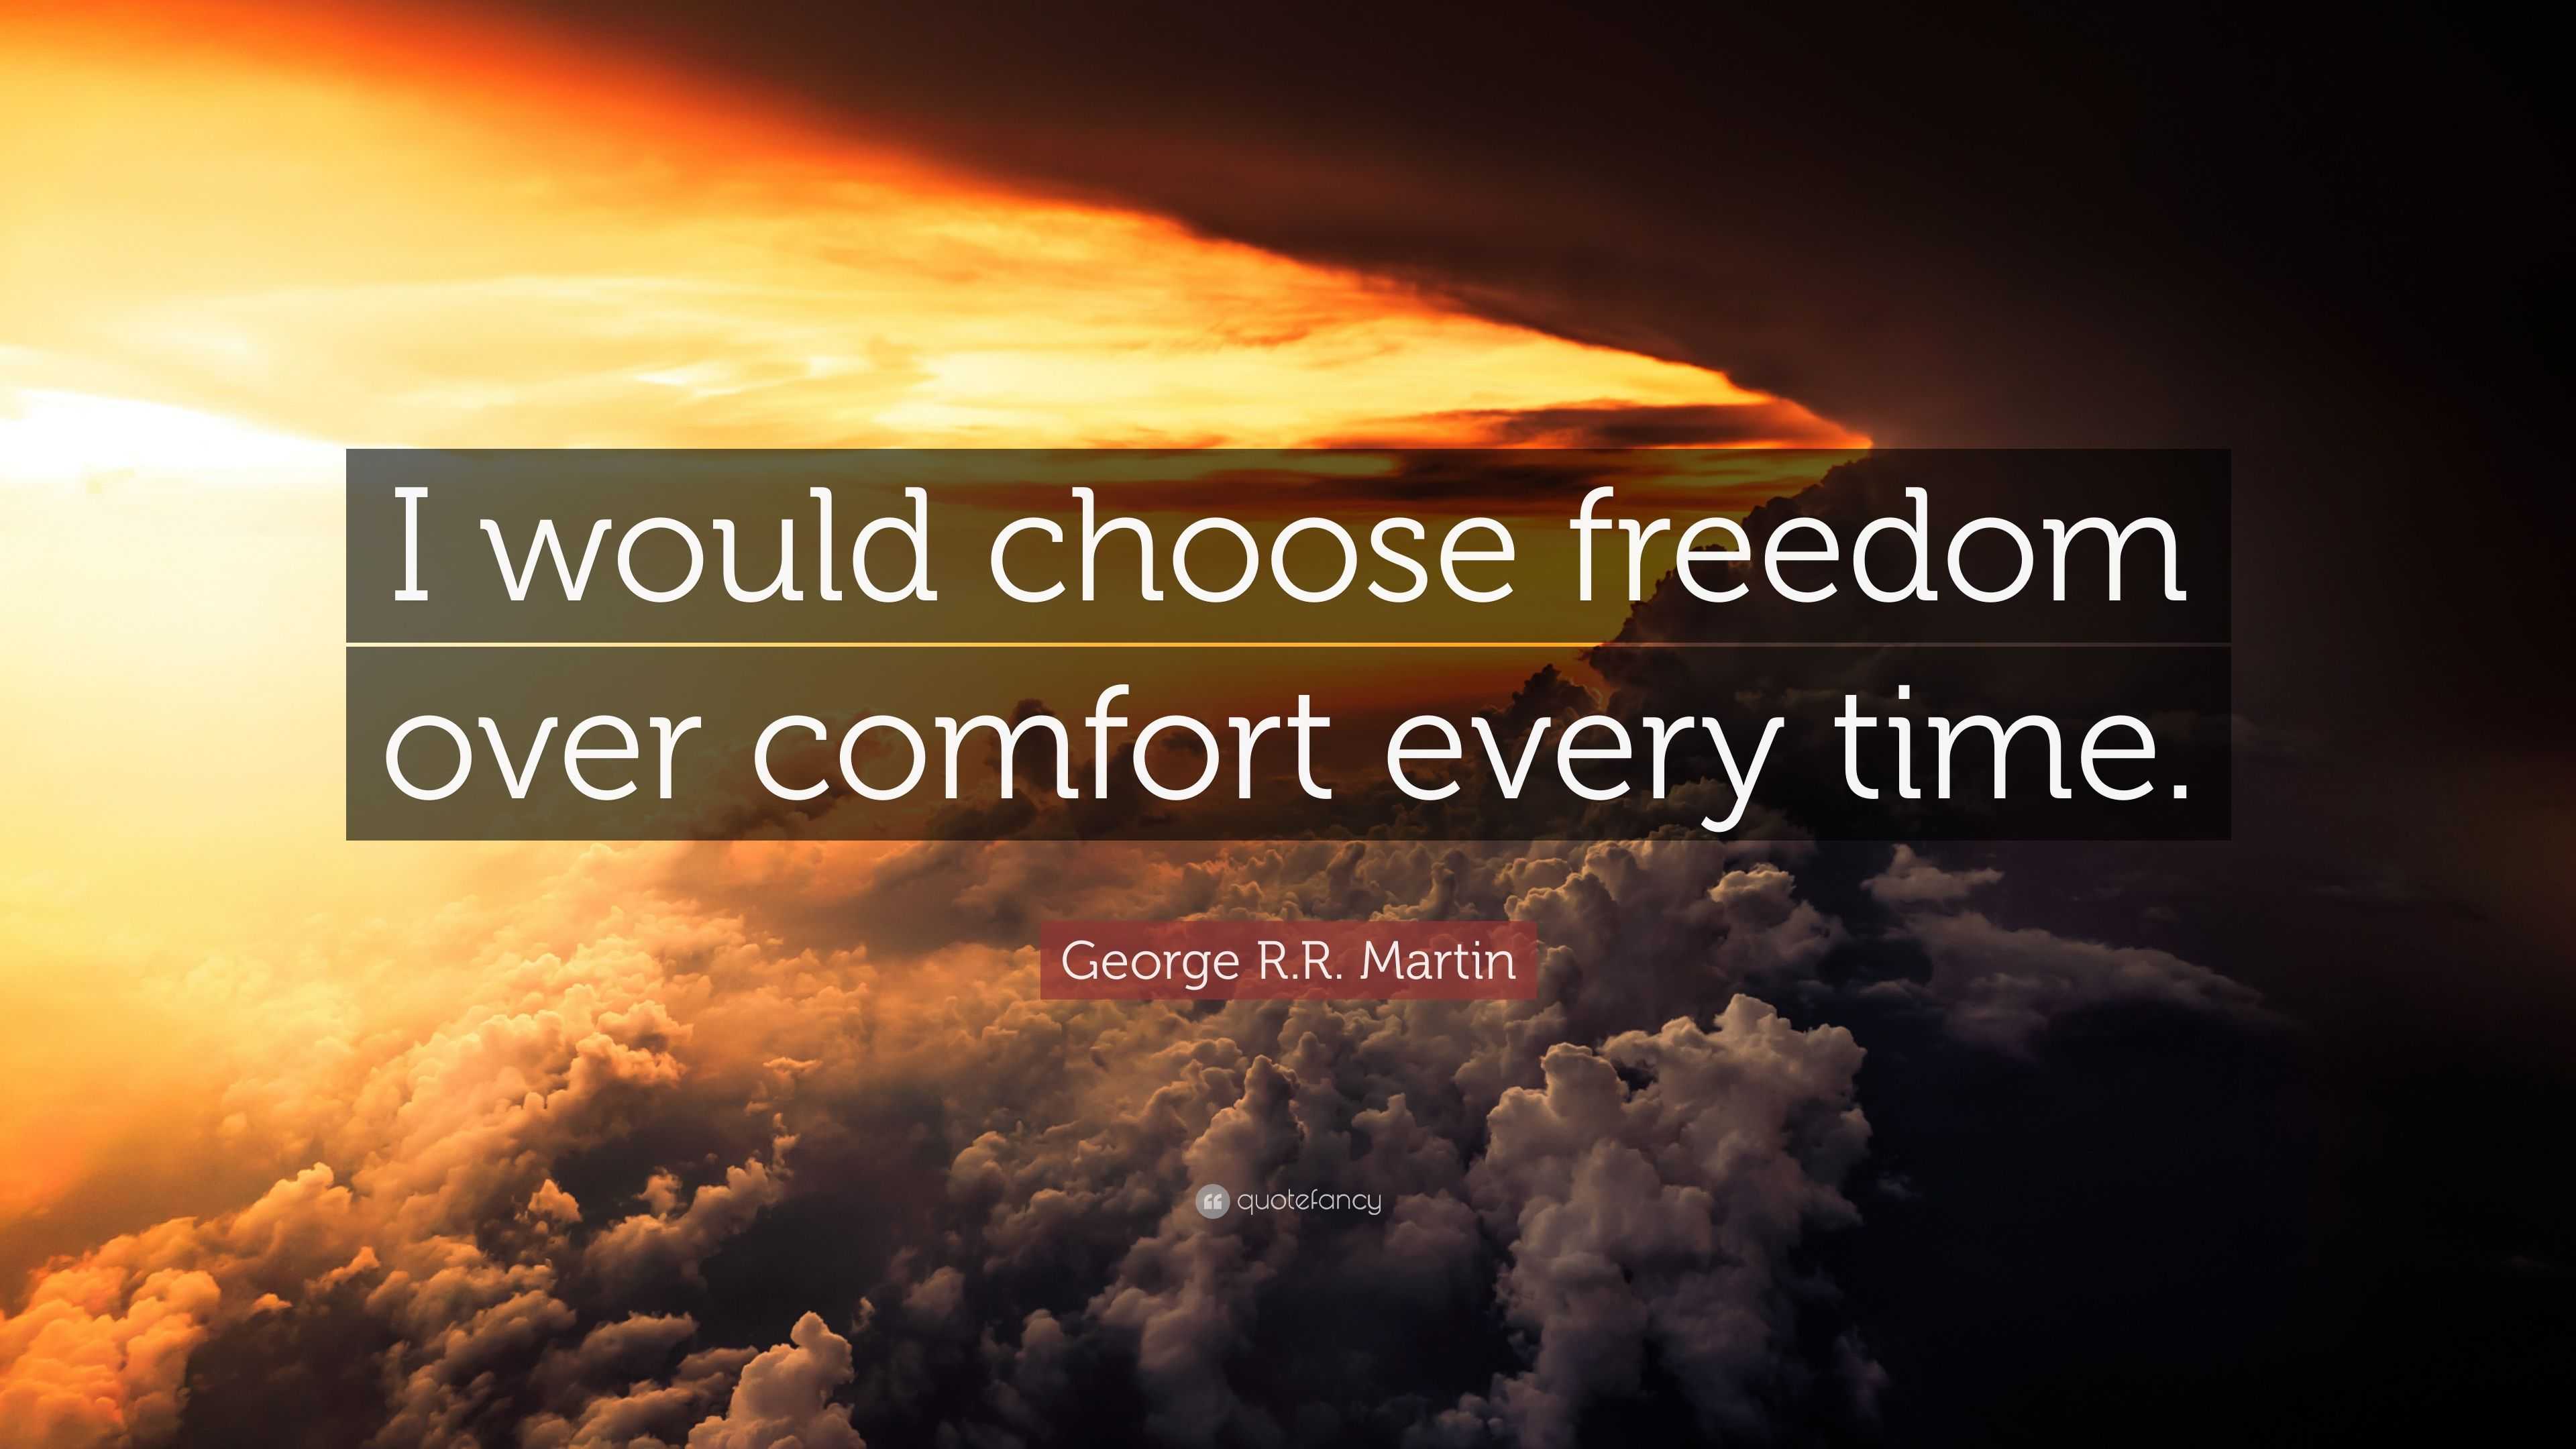 George R.R. Martin Quote: “I would choose freedom over comfort every time.”